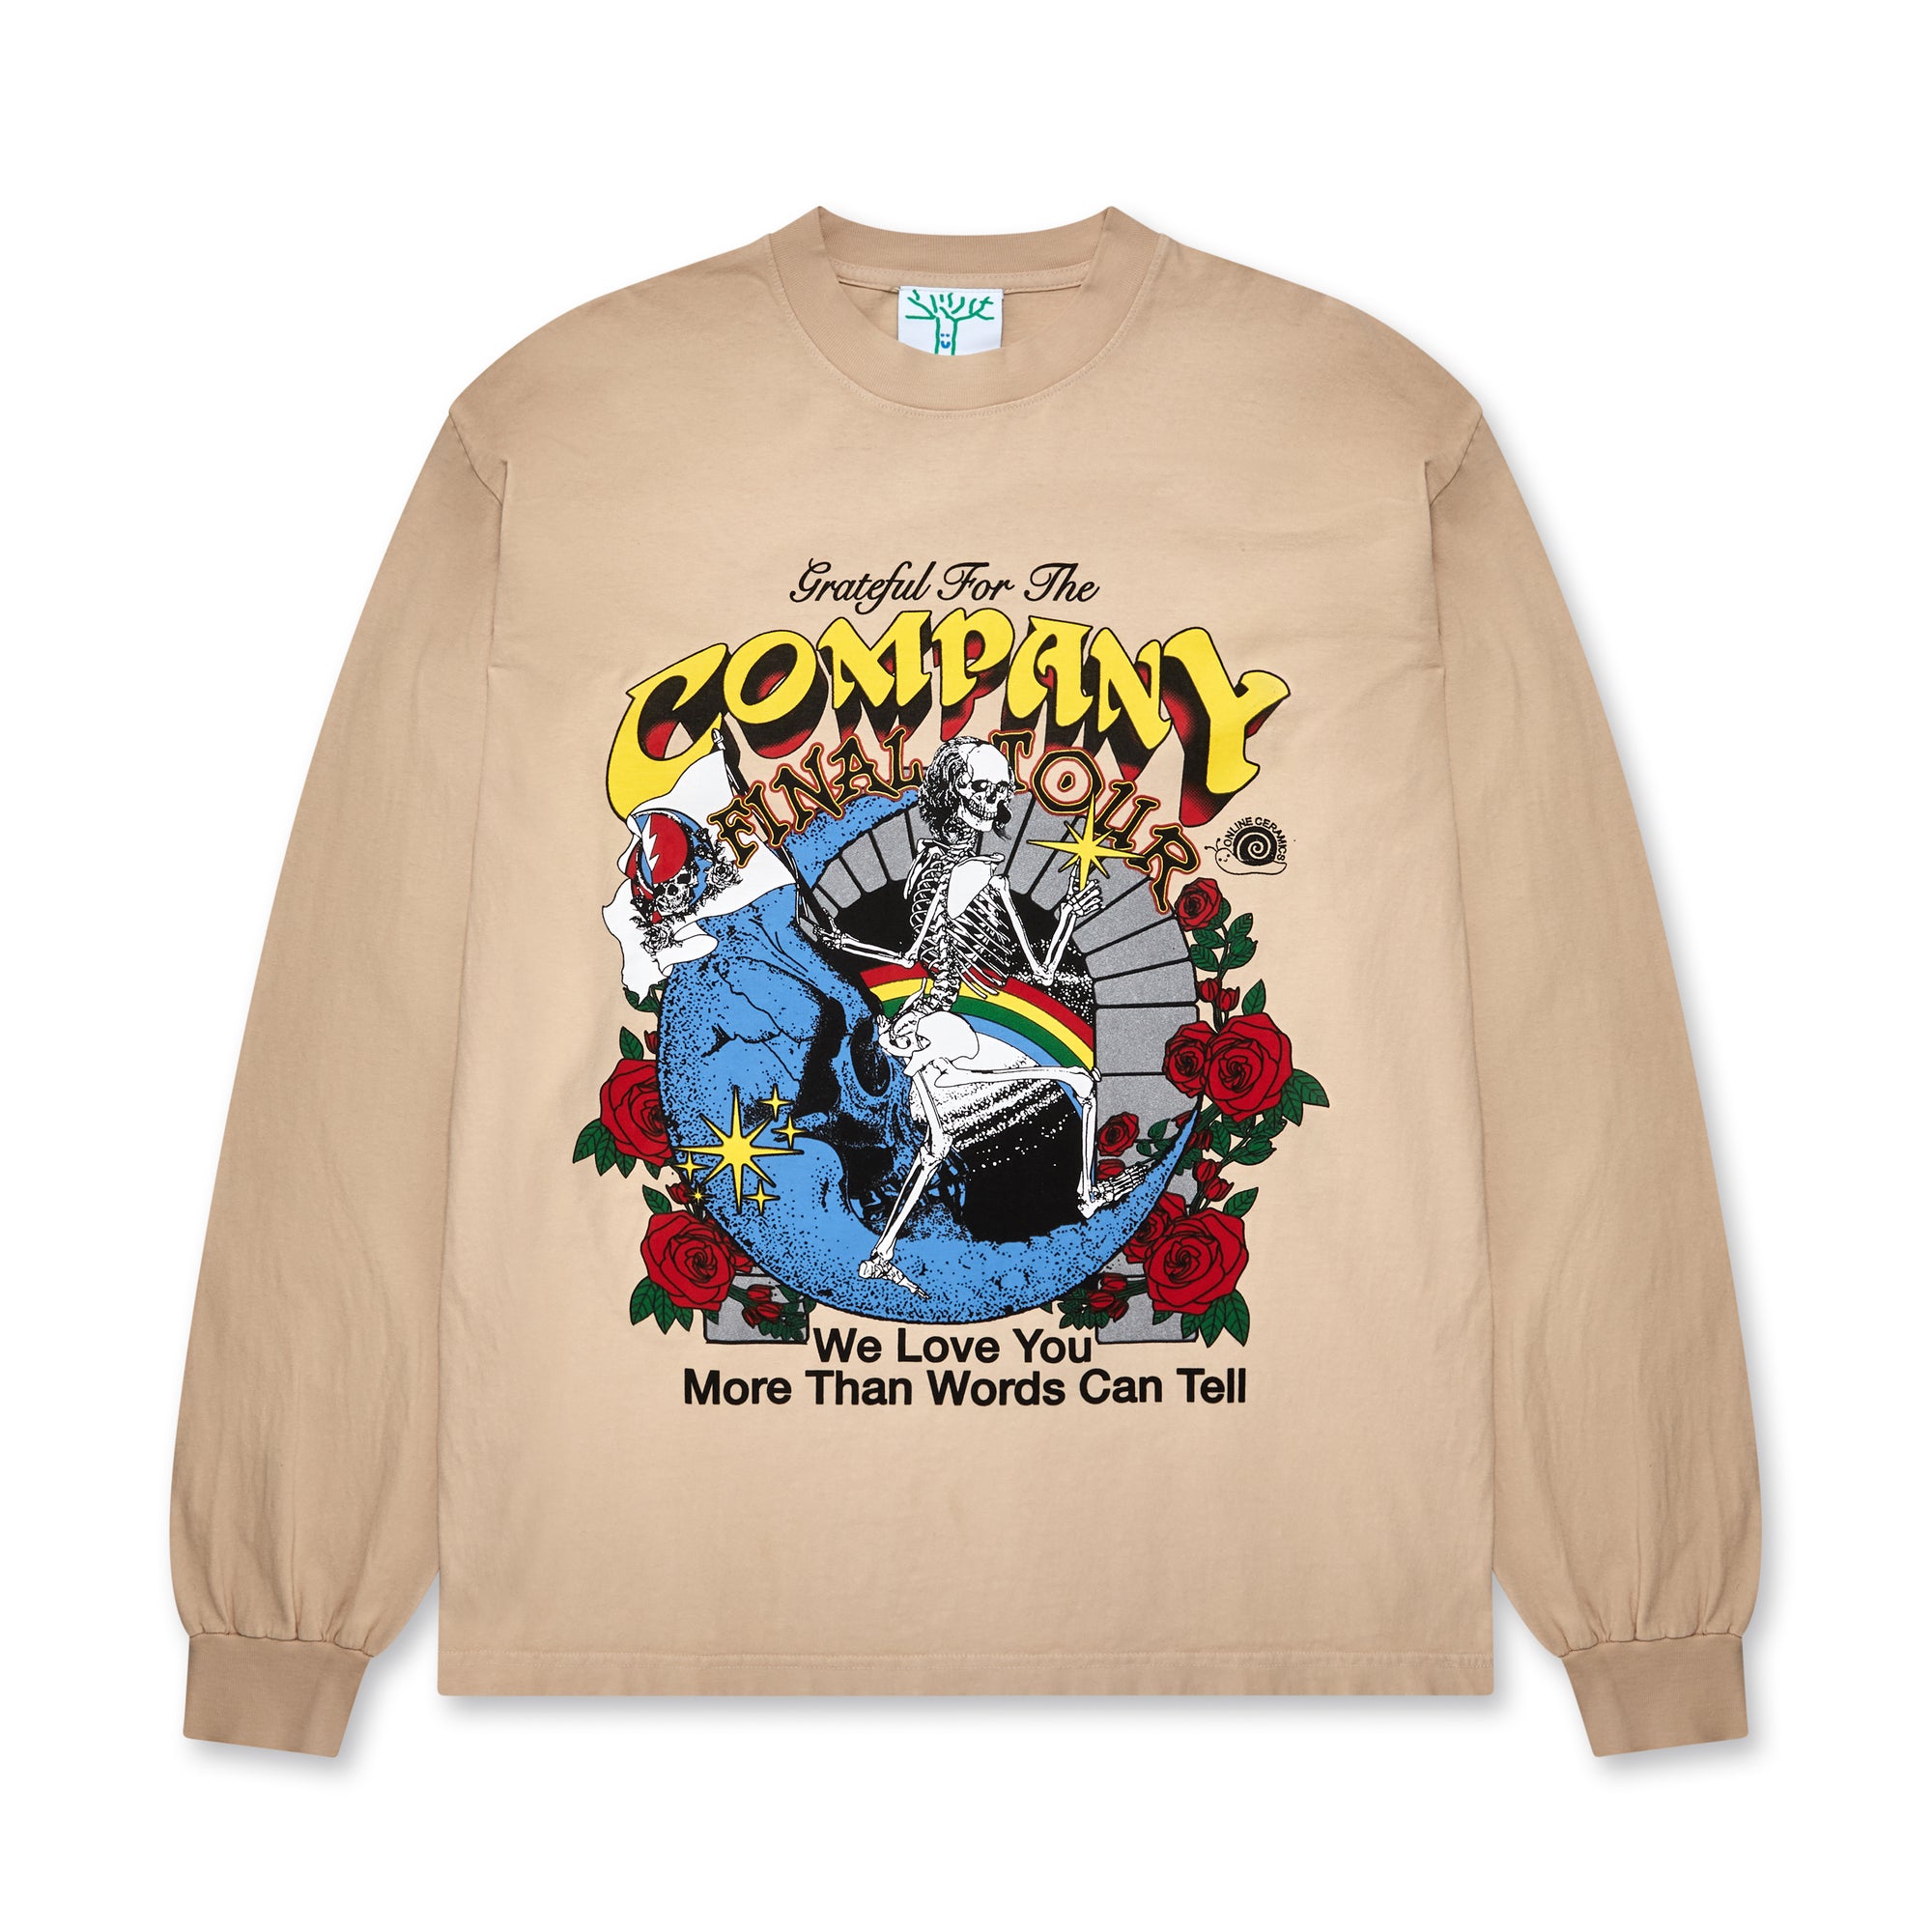 Online Ceramics - Grateful For The Company LS Tee - (Beige) view 1